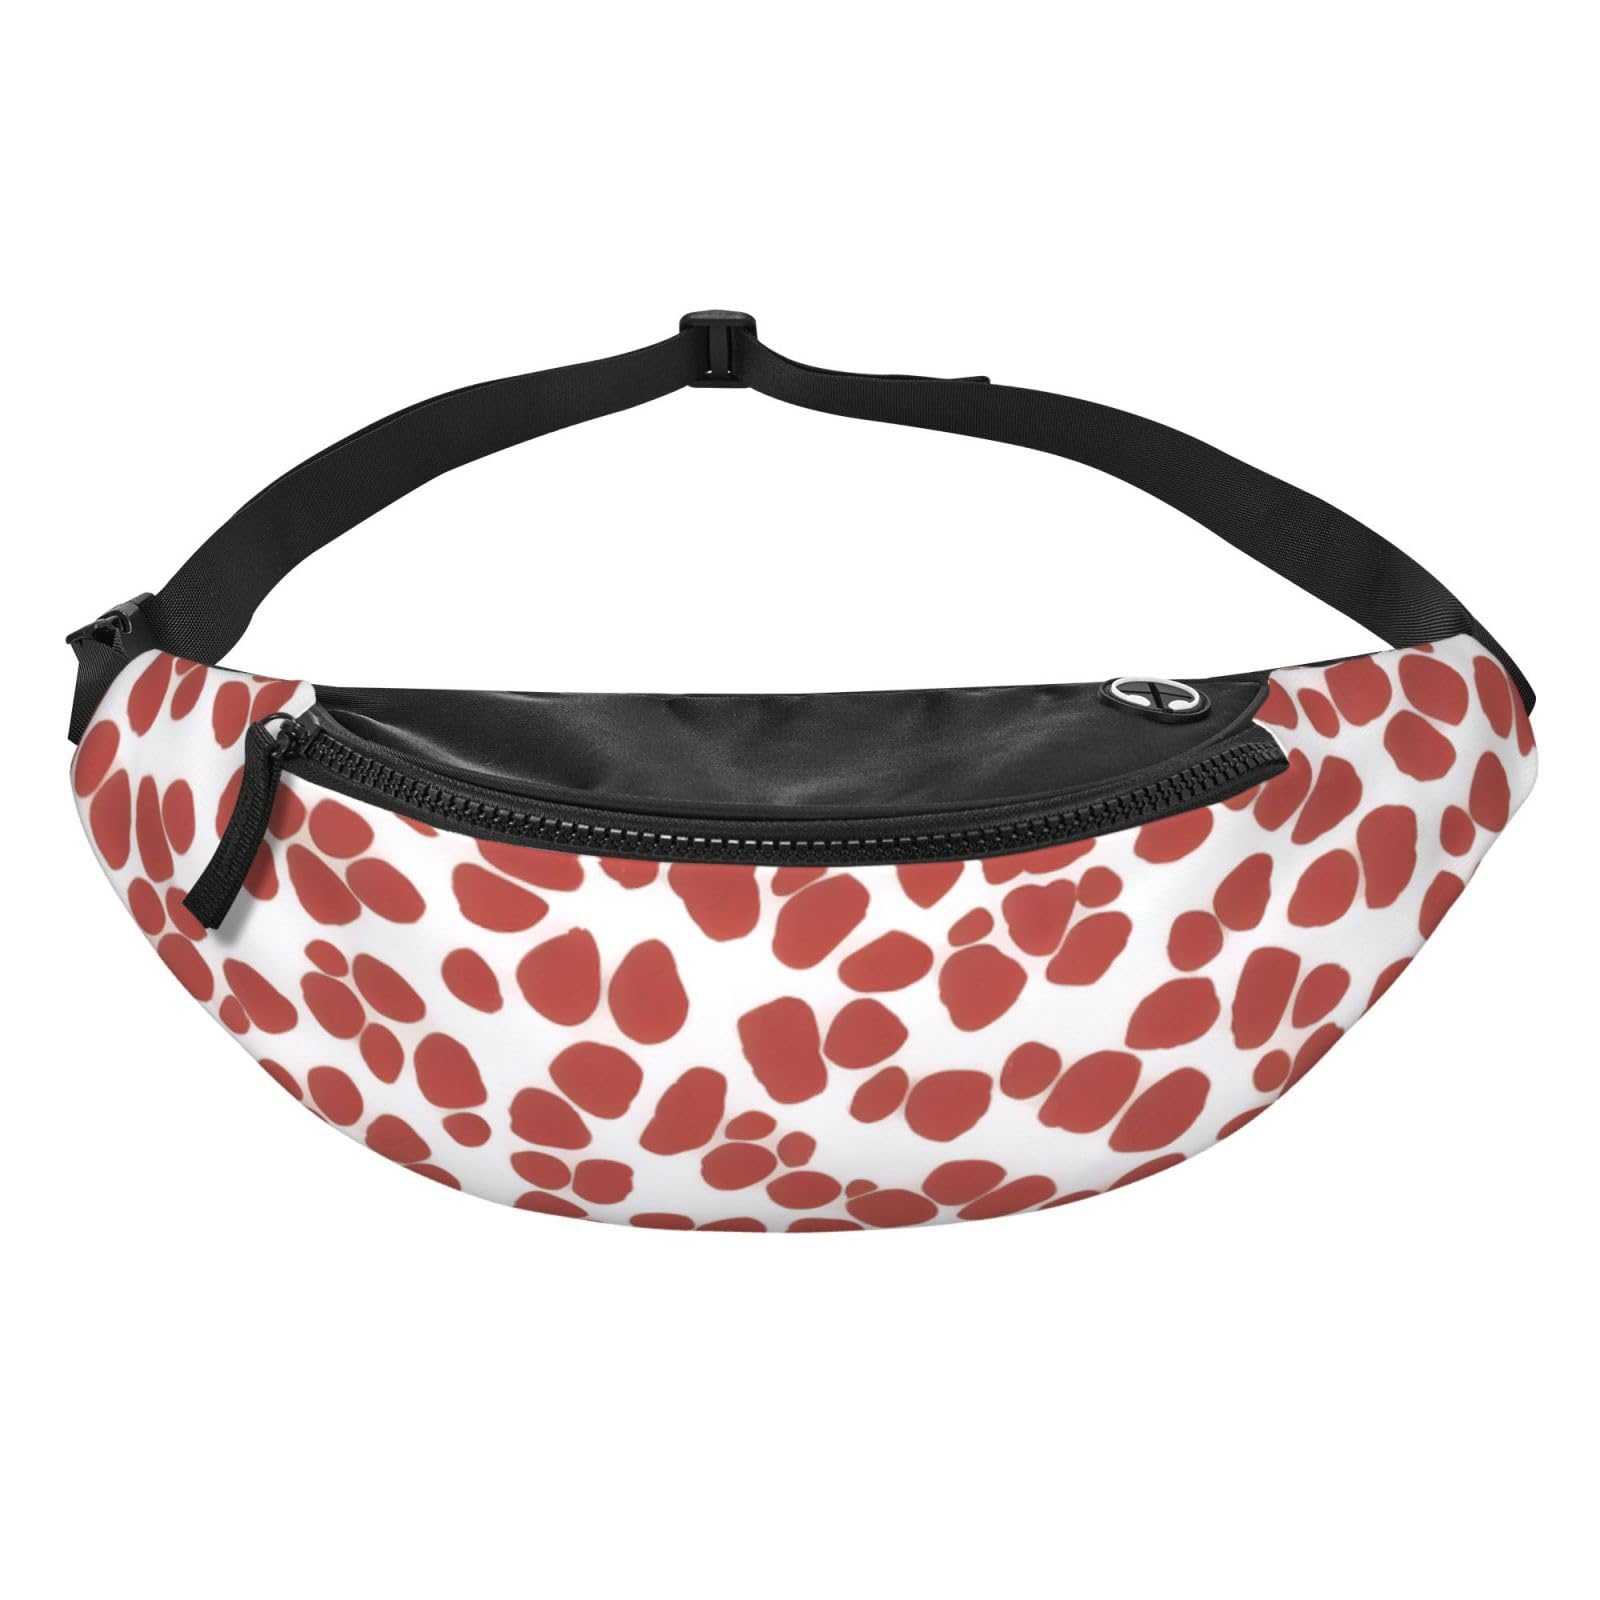 Animal Printed Patterns Fanny Pack For Women And Men Fashion Waist Bag With Adjustable Strap For Hiking Running Cycling